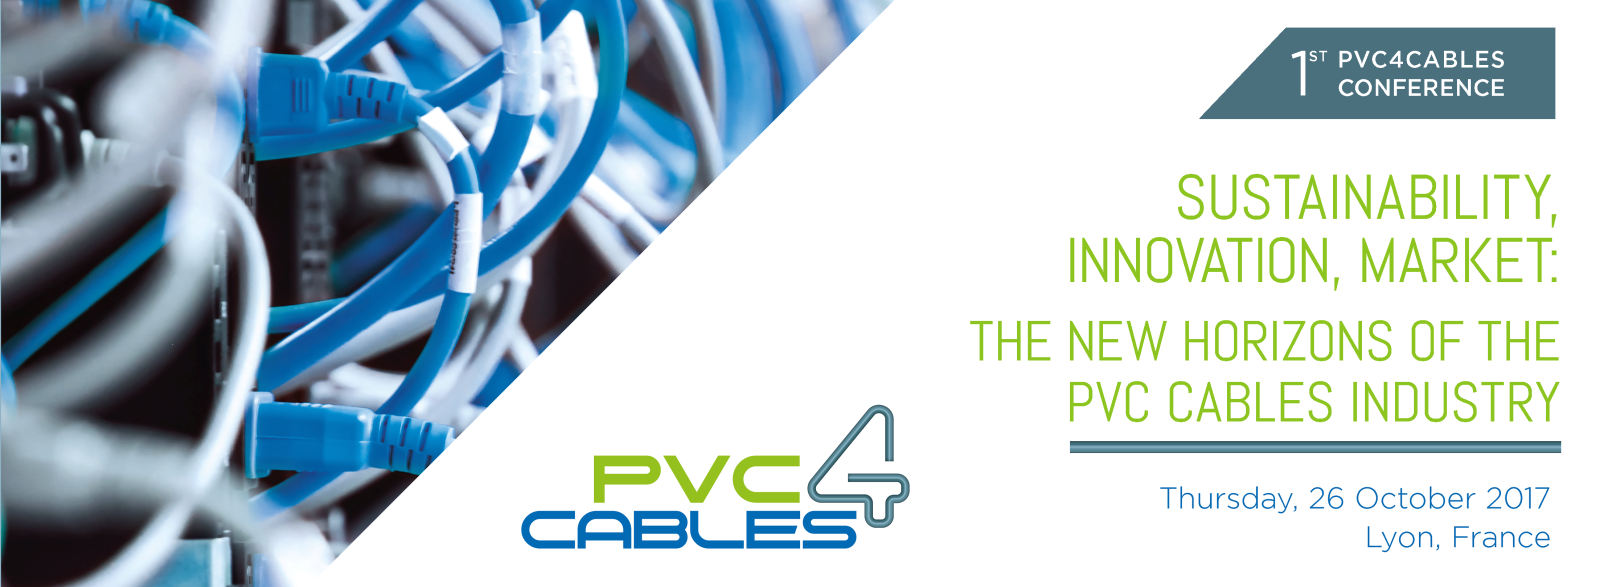 PVC4cables_conference (1).png